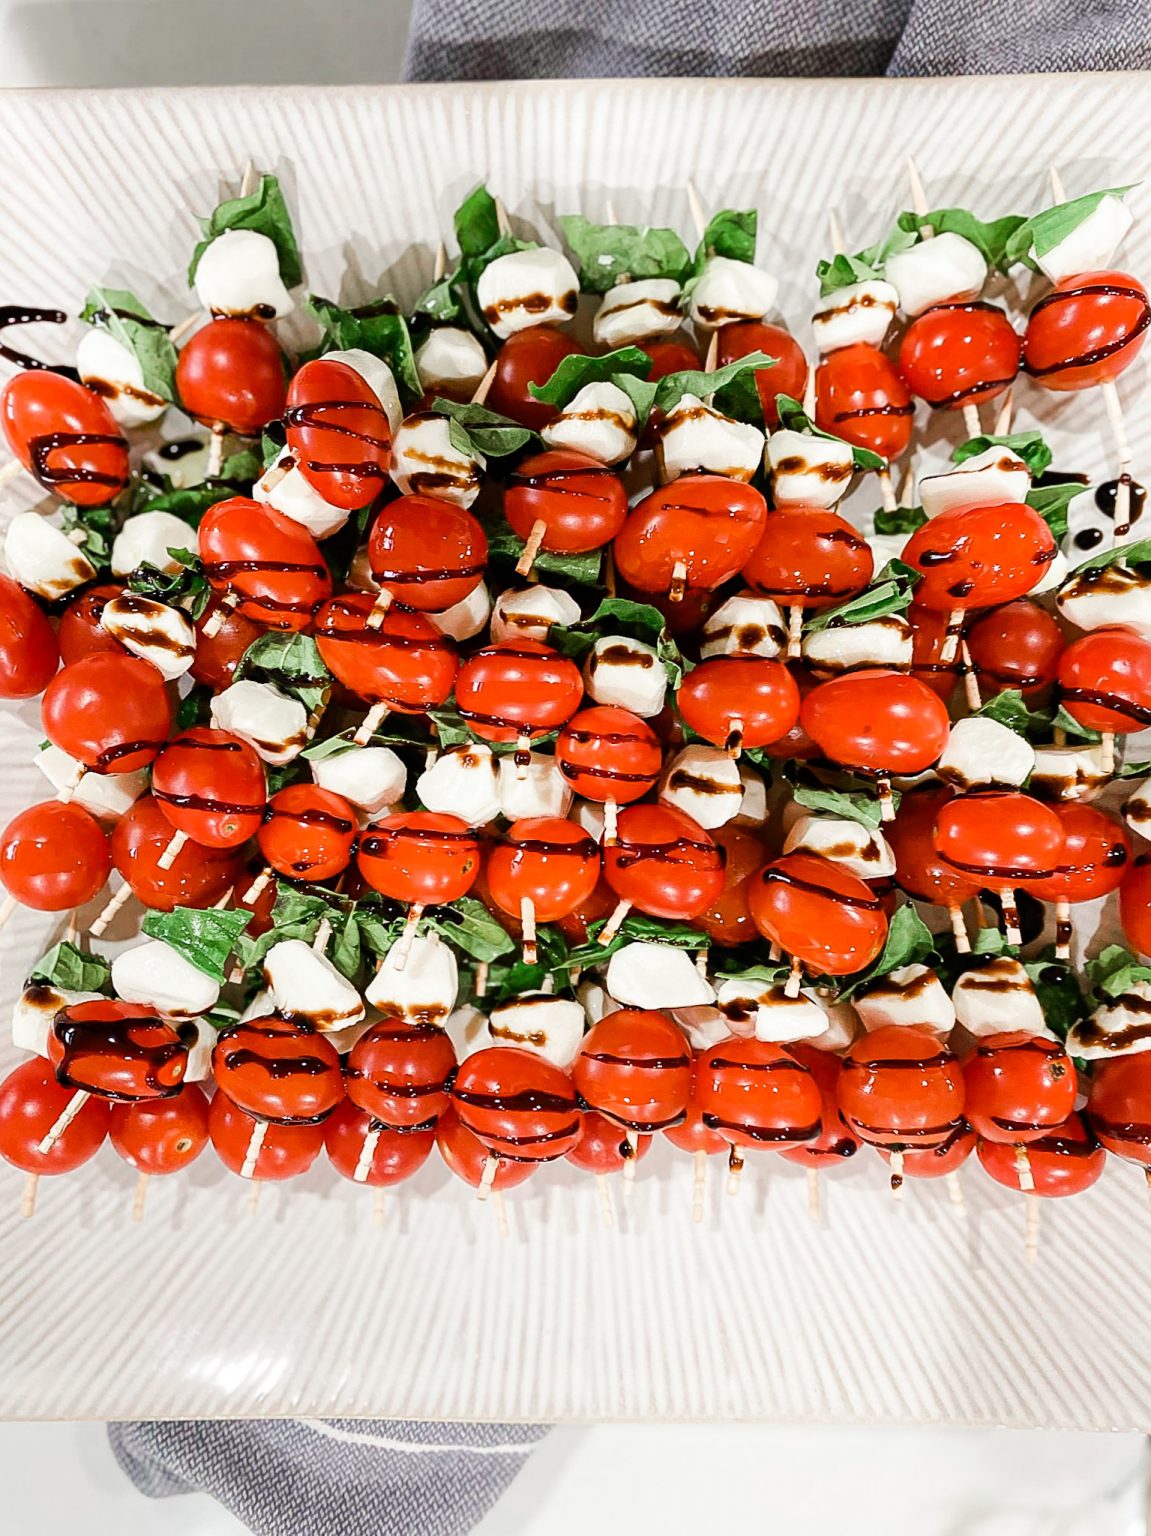 Easy And Quick Caprese Salad Skewers Recipe - Healthy By Heather Brown